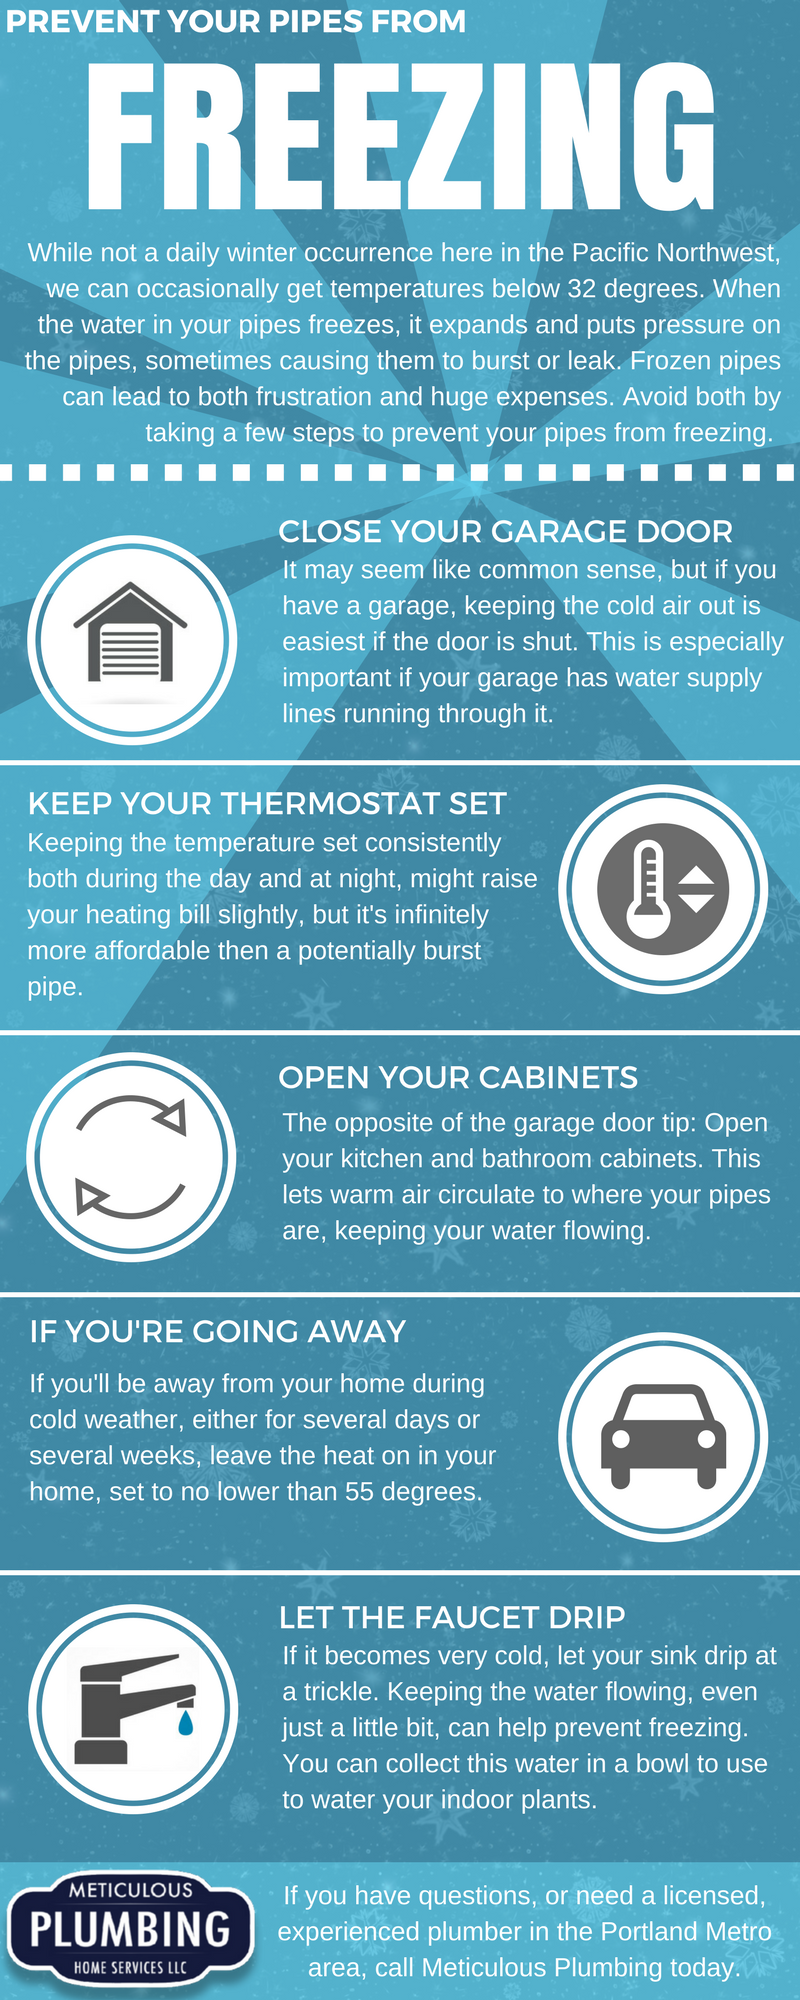 Prevent Your Pipes from Freezing. Frozen pipes issues